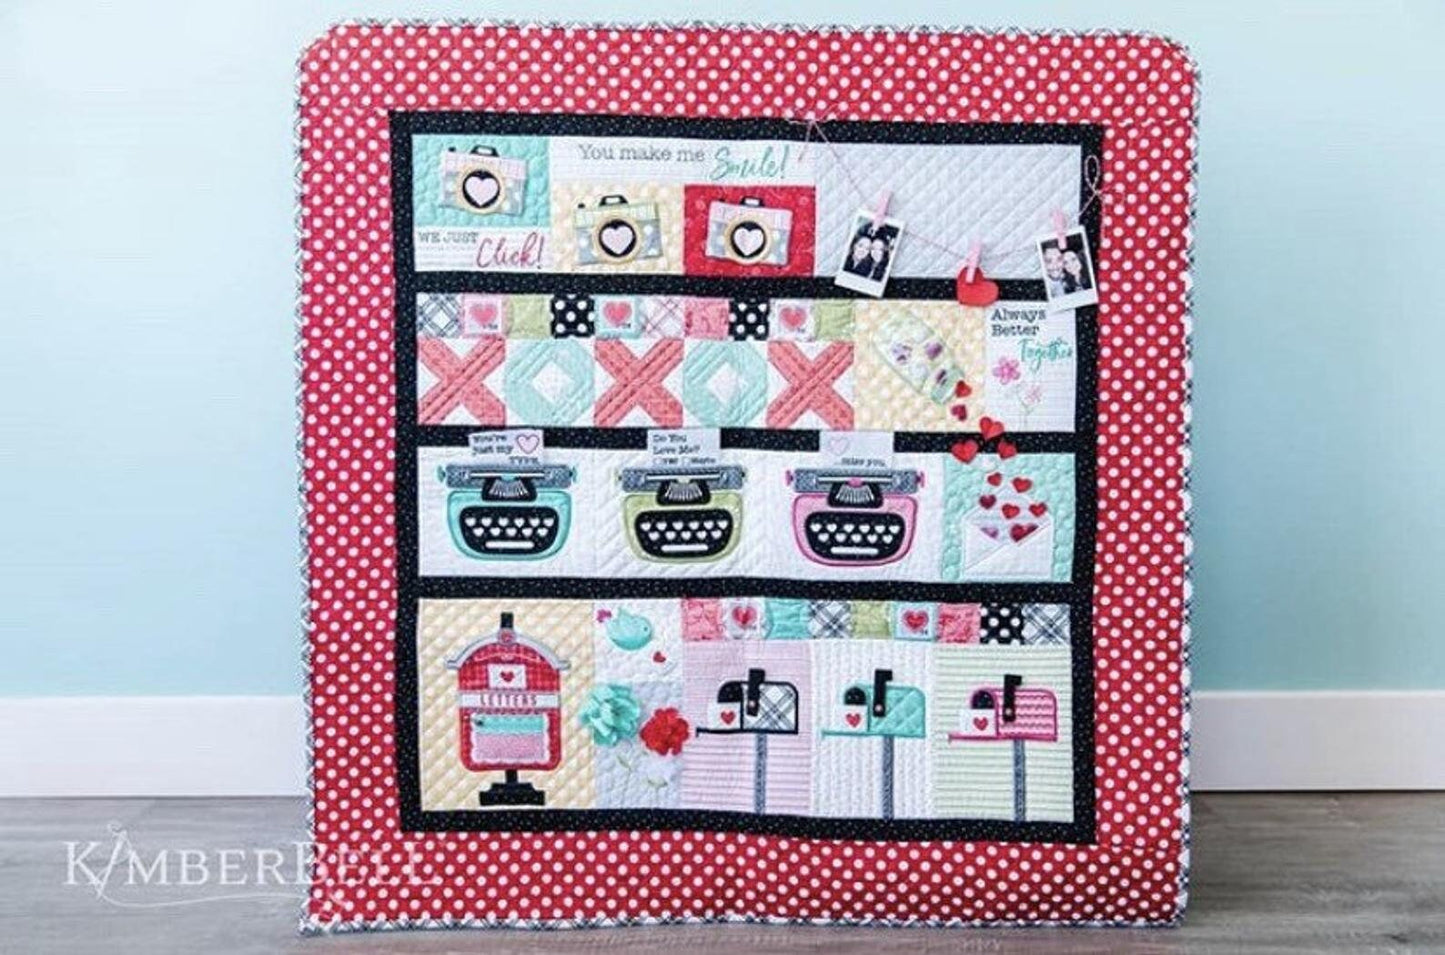 Maywood Studio KimberBell's Love Notes Embroidery KD808 Pattern with Embroidery CD